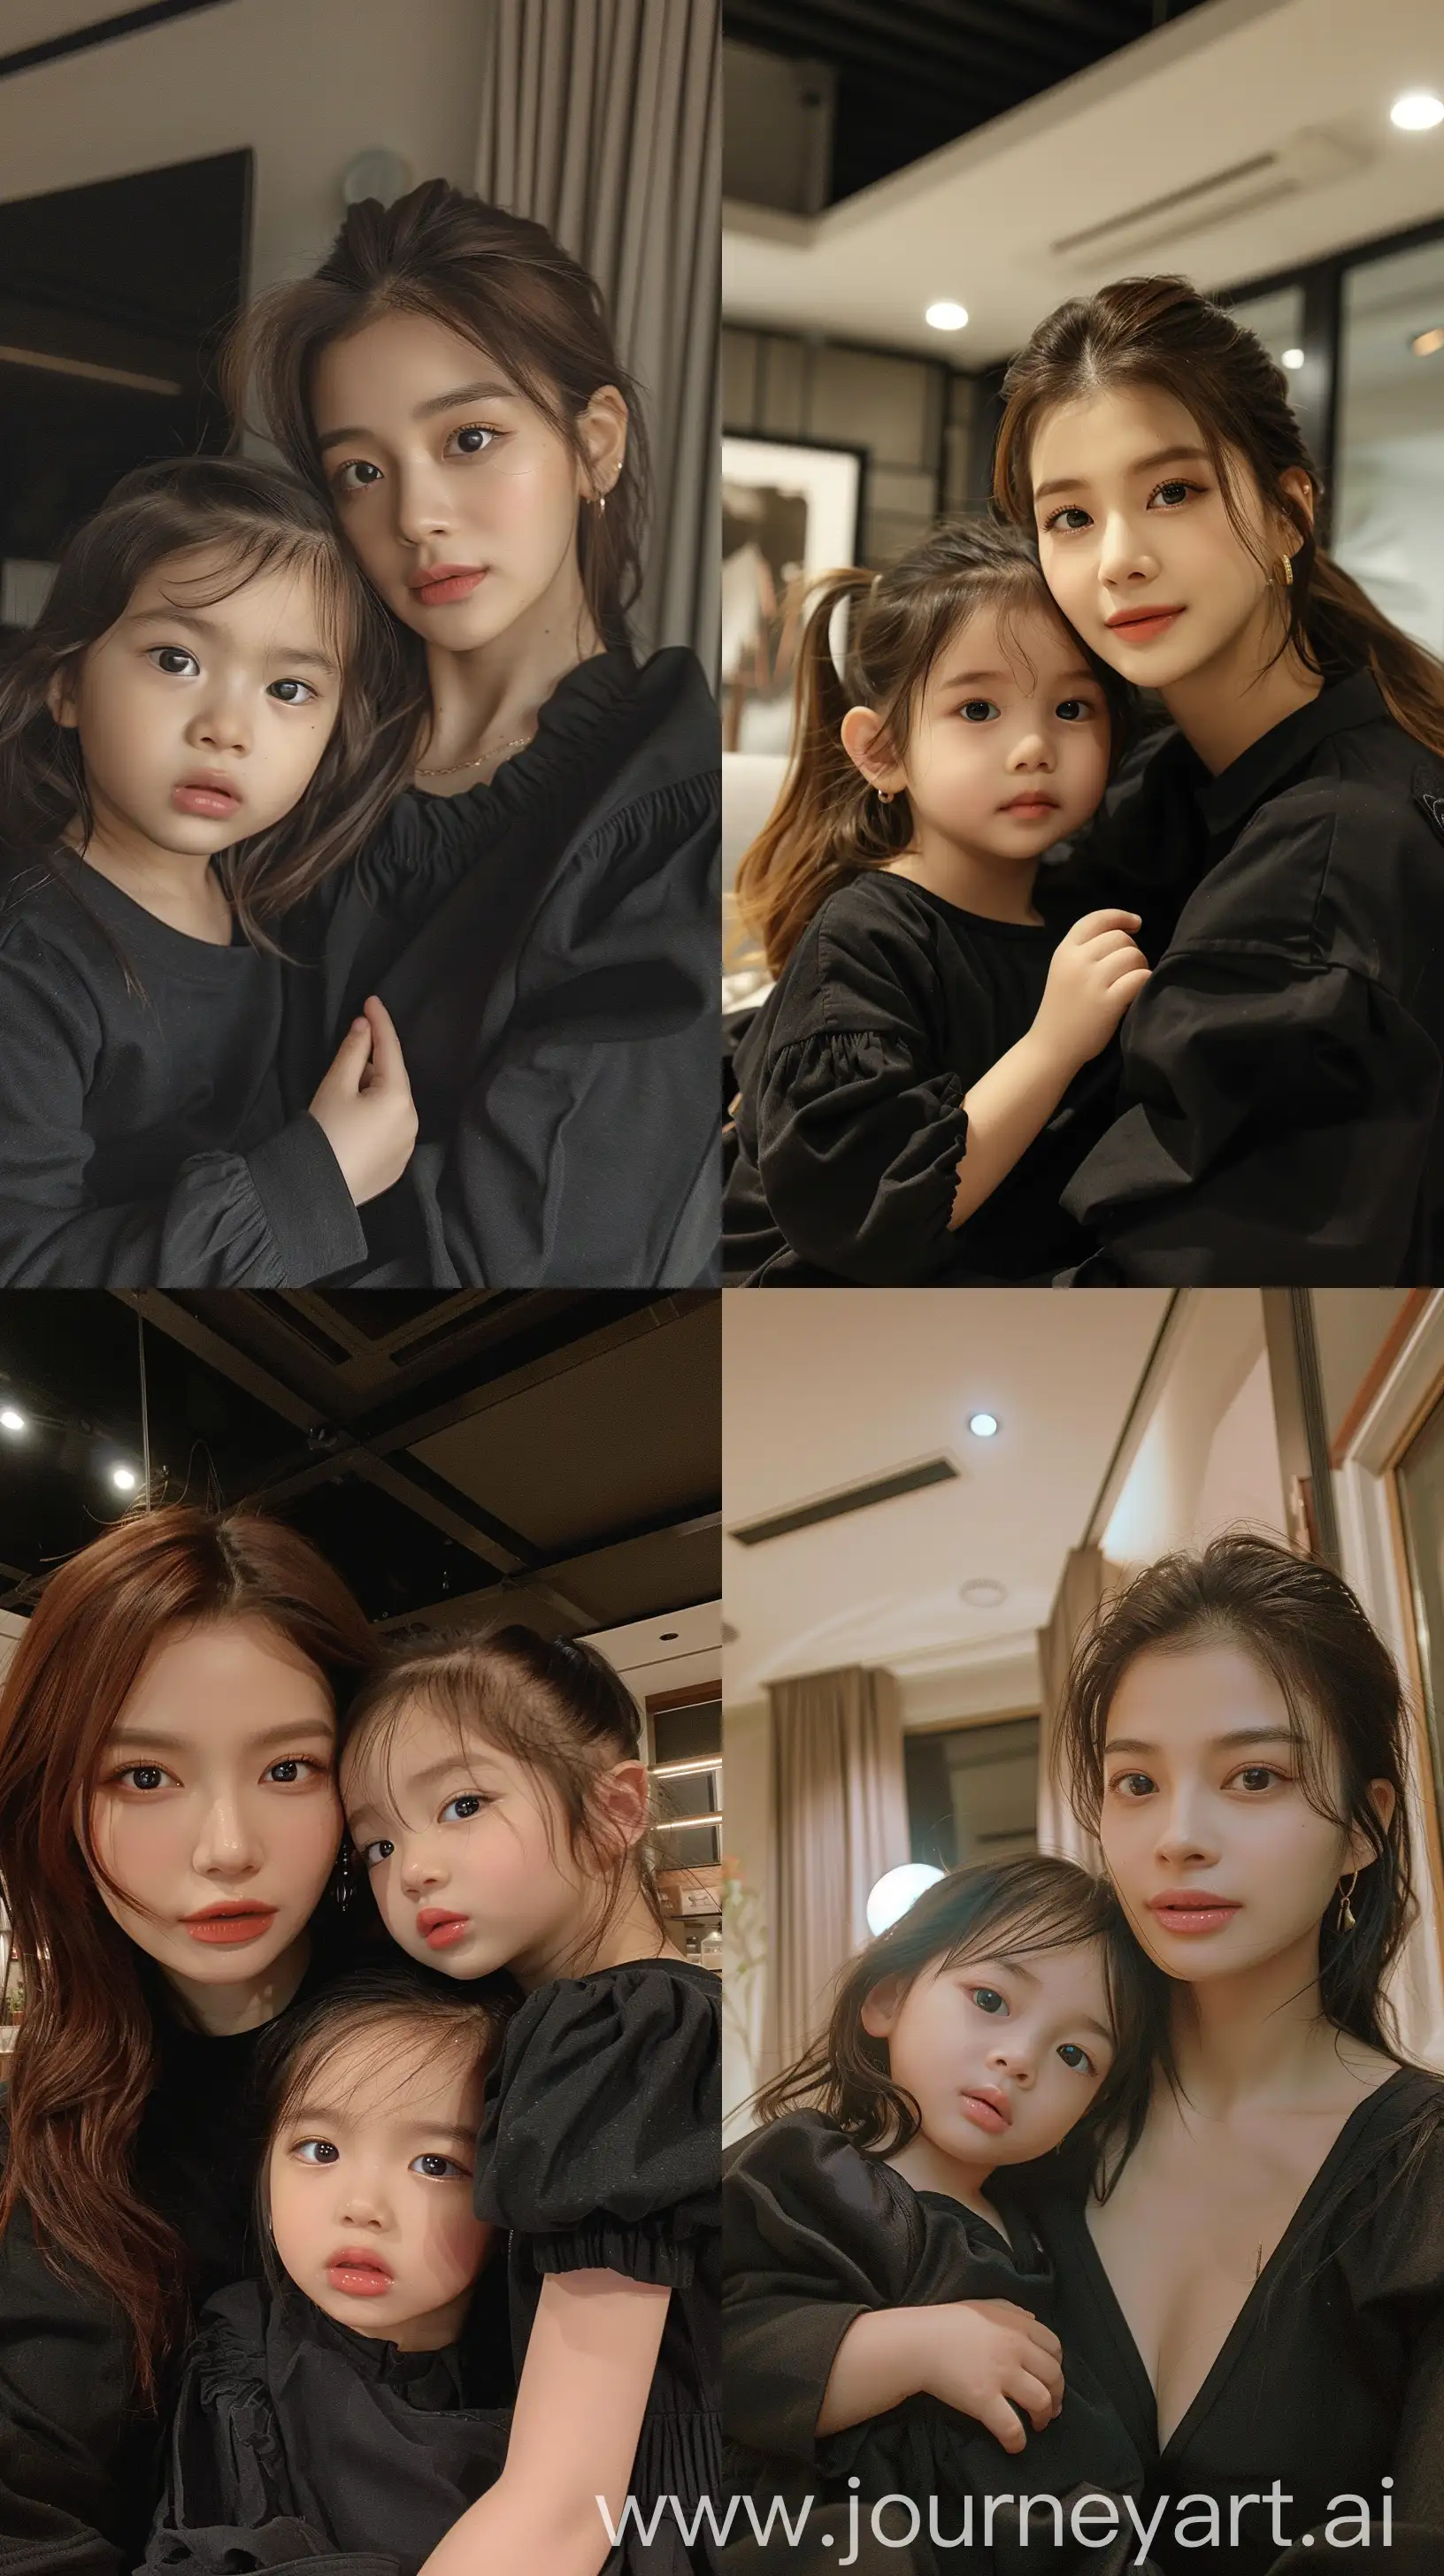 blackpink's jennie selfie with 2 years old  girl, facial feature look a like blackpink's jennie, aestethic selfie, wearing black outfit, night times, aestethic make up,hotly elegant young mom,simple looks,casual everyday --ar 9:16 --stylize 250